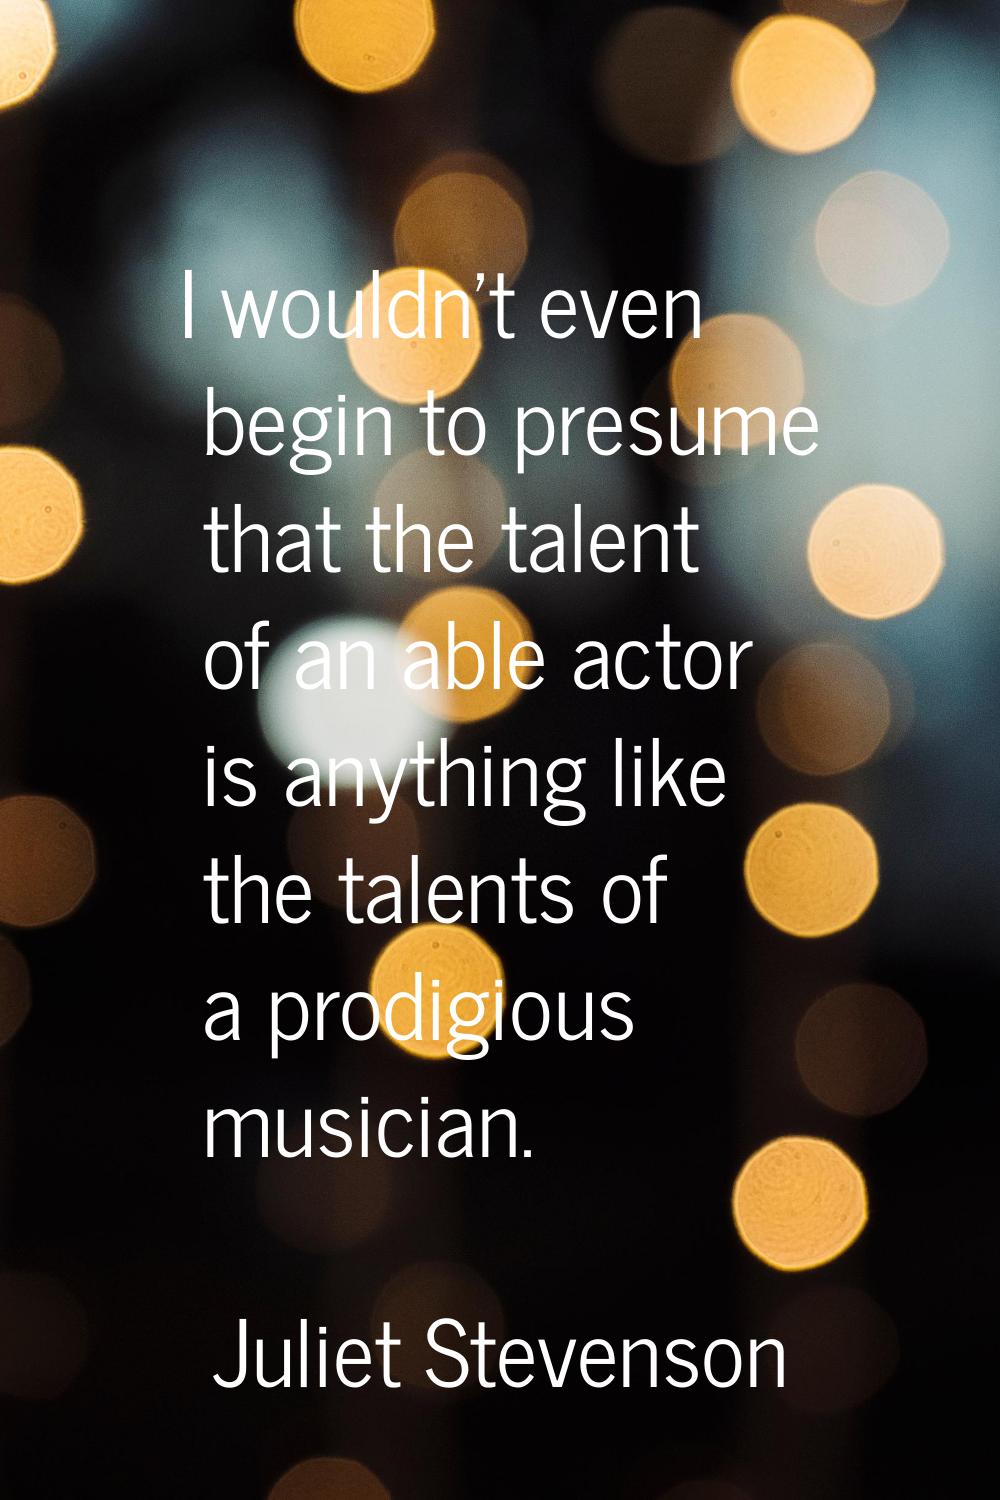 I wouldn't even begin to presume that the talent of an able actor is anything like the talents of a